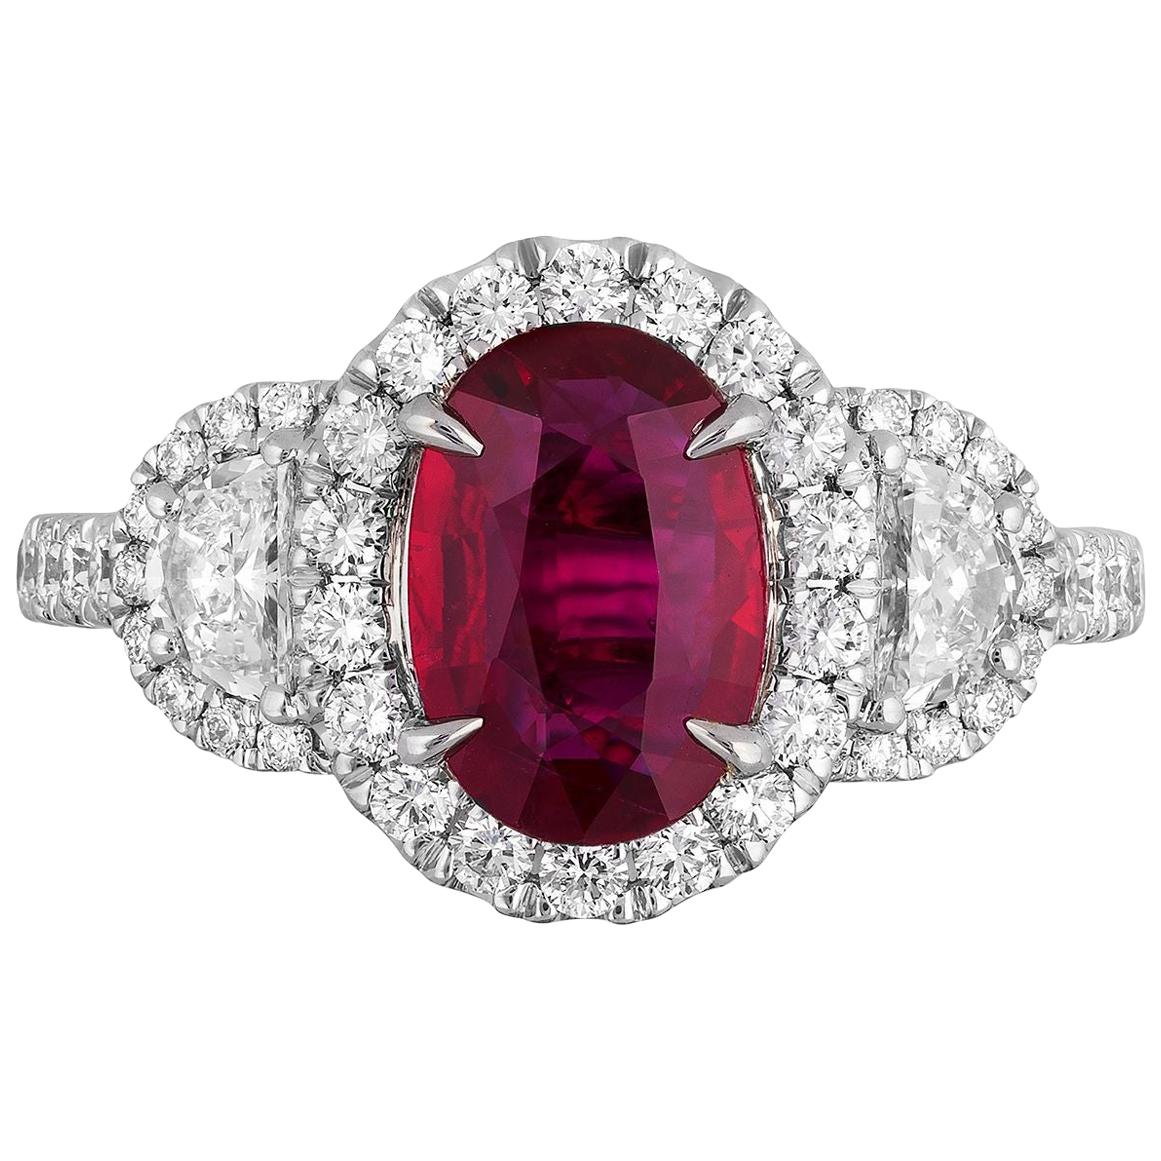 CDC Certified 1.52 Carat Mozambique Ruby Diamond Ring For Sale